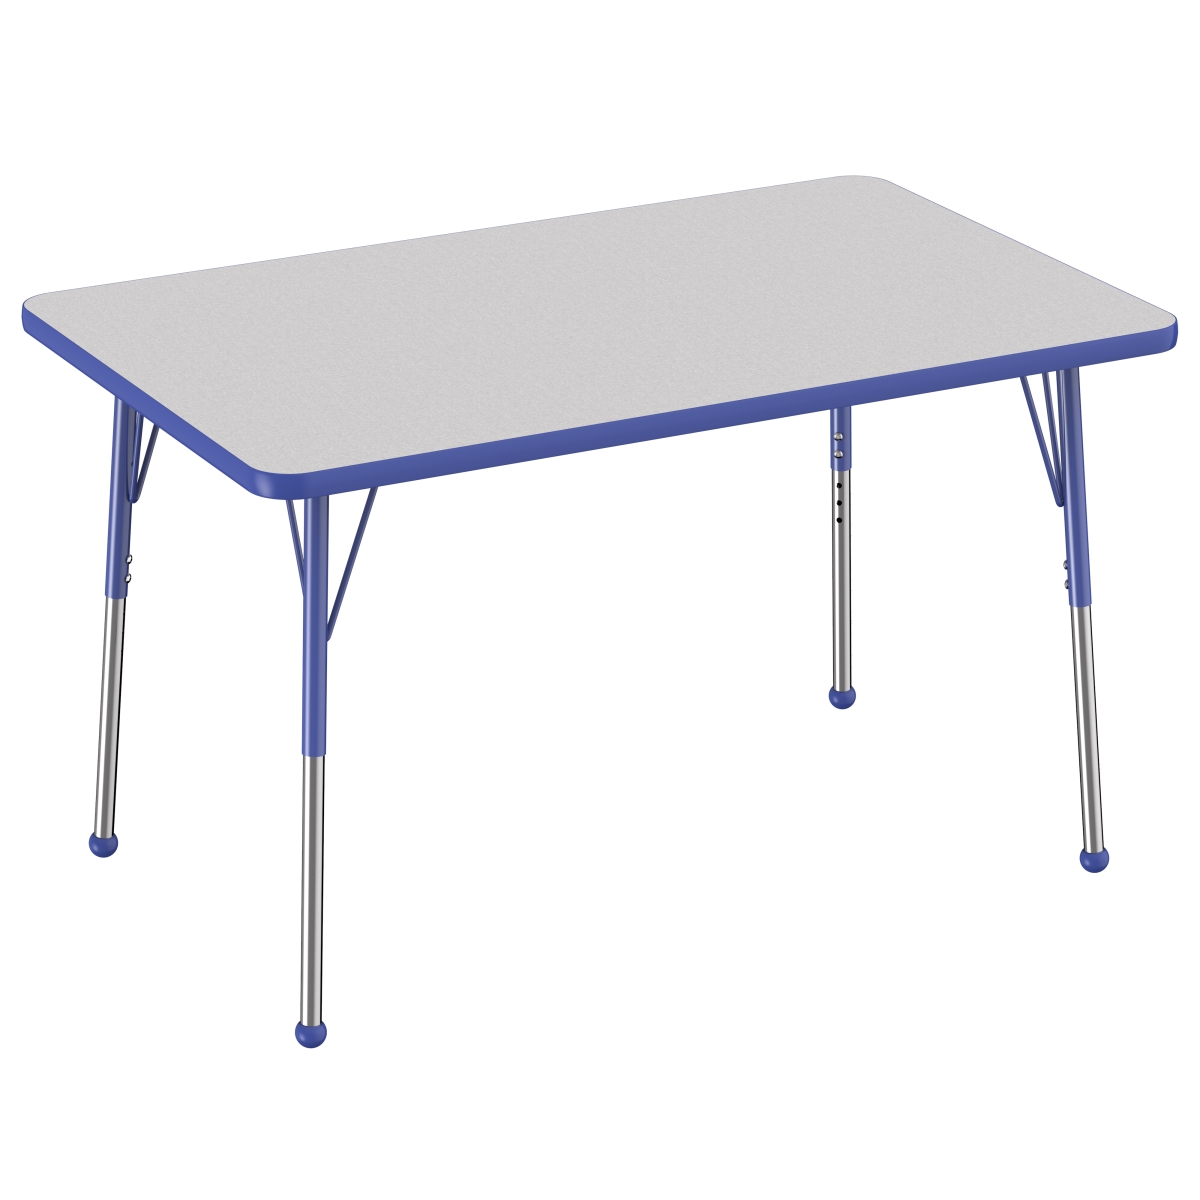 10020-gybl 30 X 48 In. Rectangle T-mold Adjustable Activity Table With Standard Ball - Grey & Blue